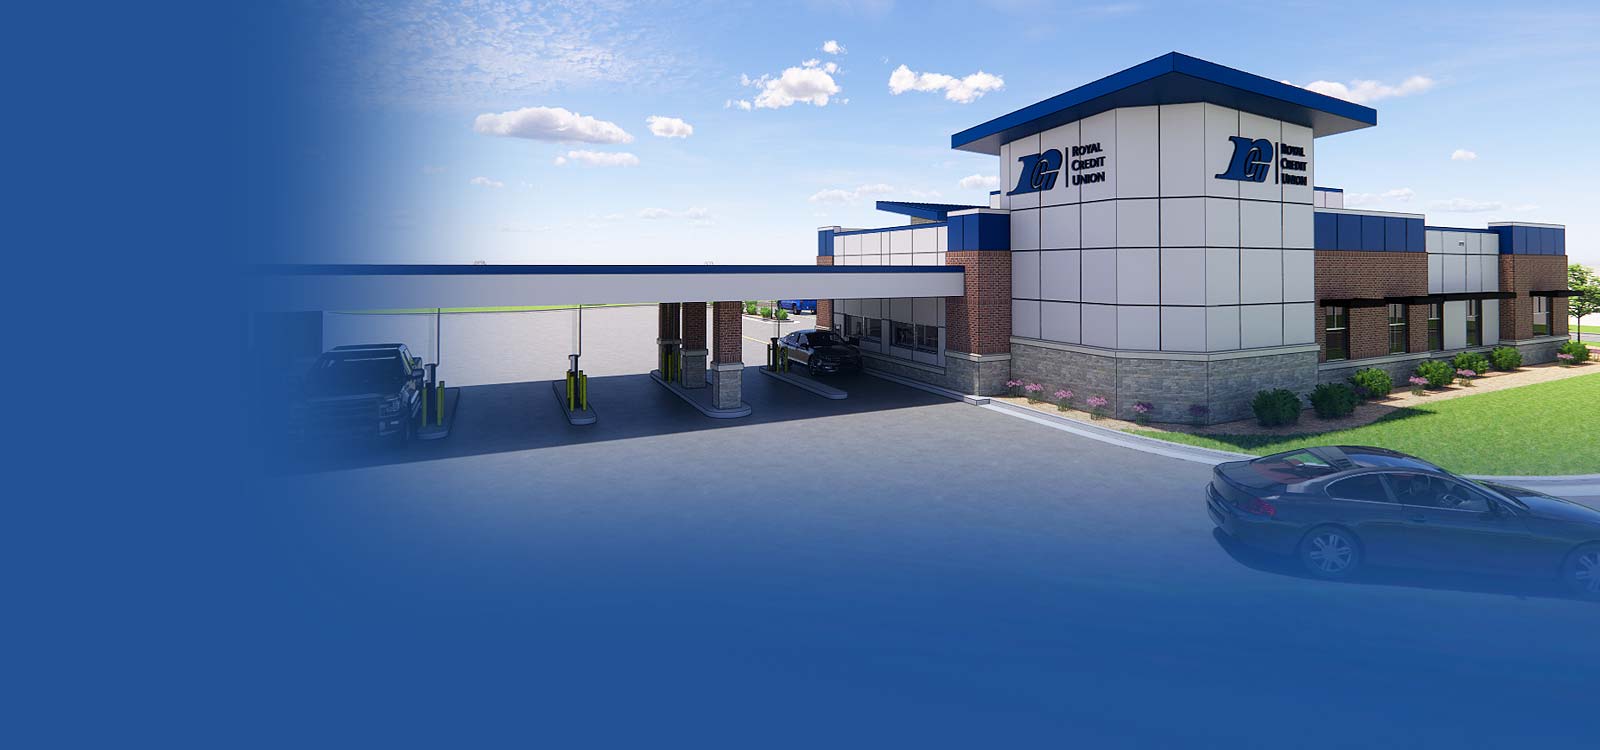 Rendering of the new Altoona Office